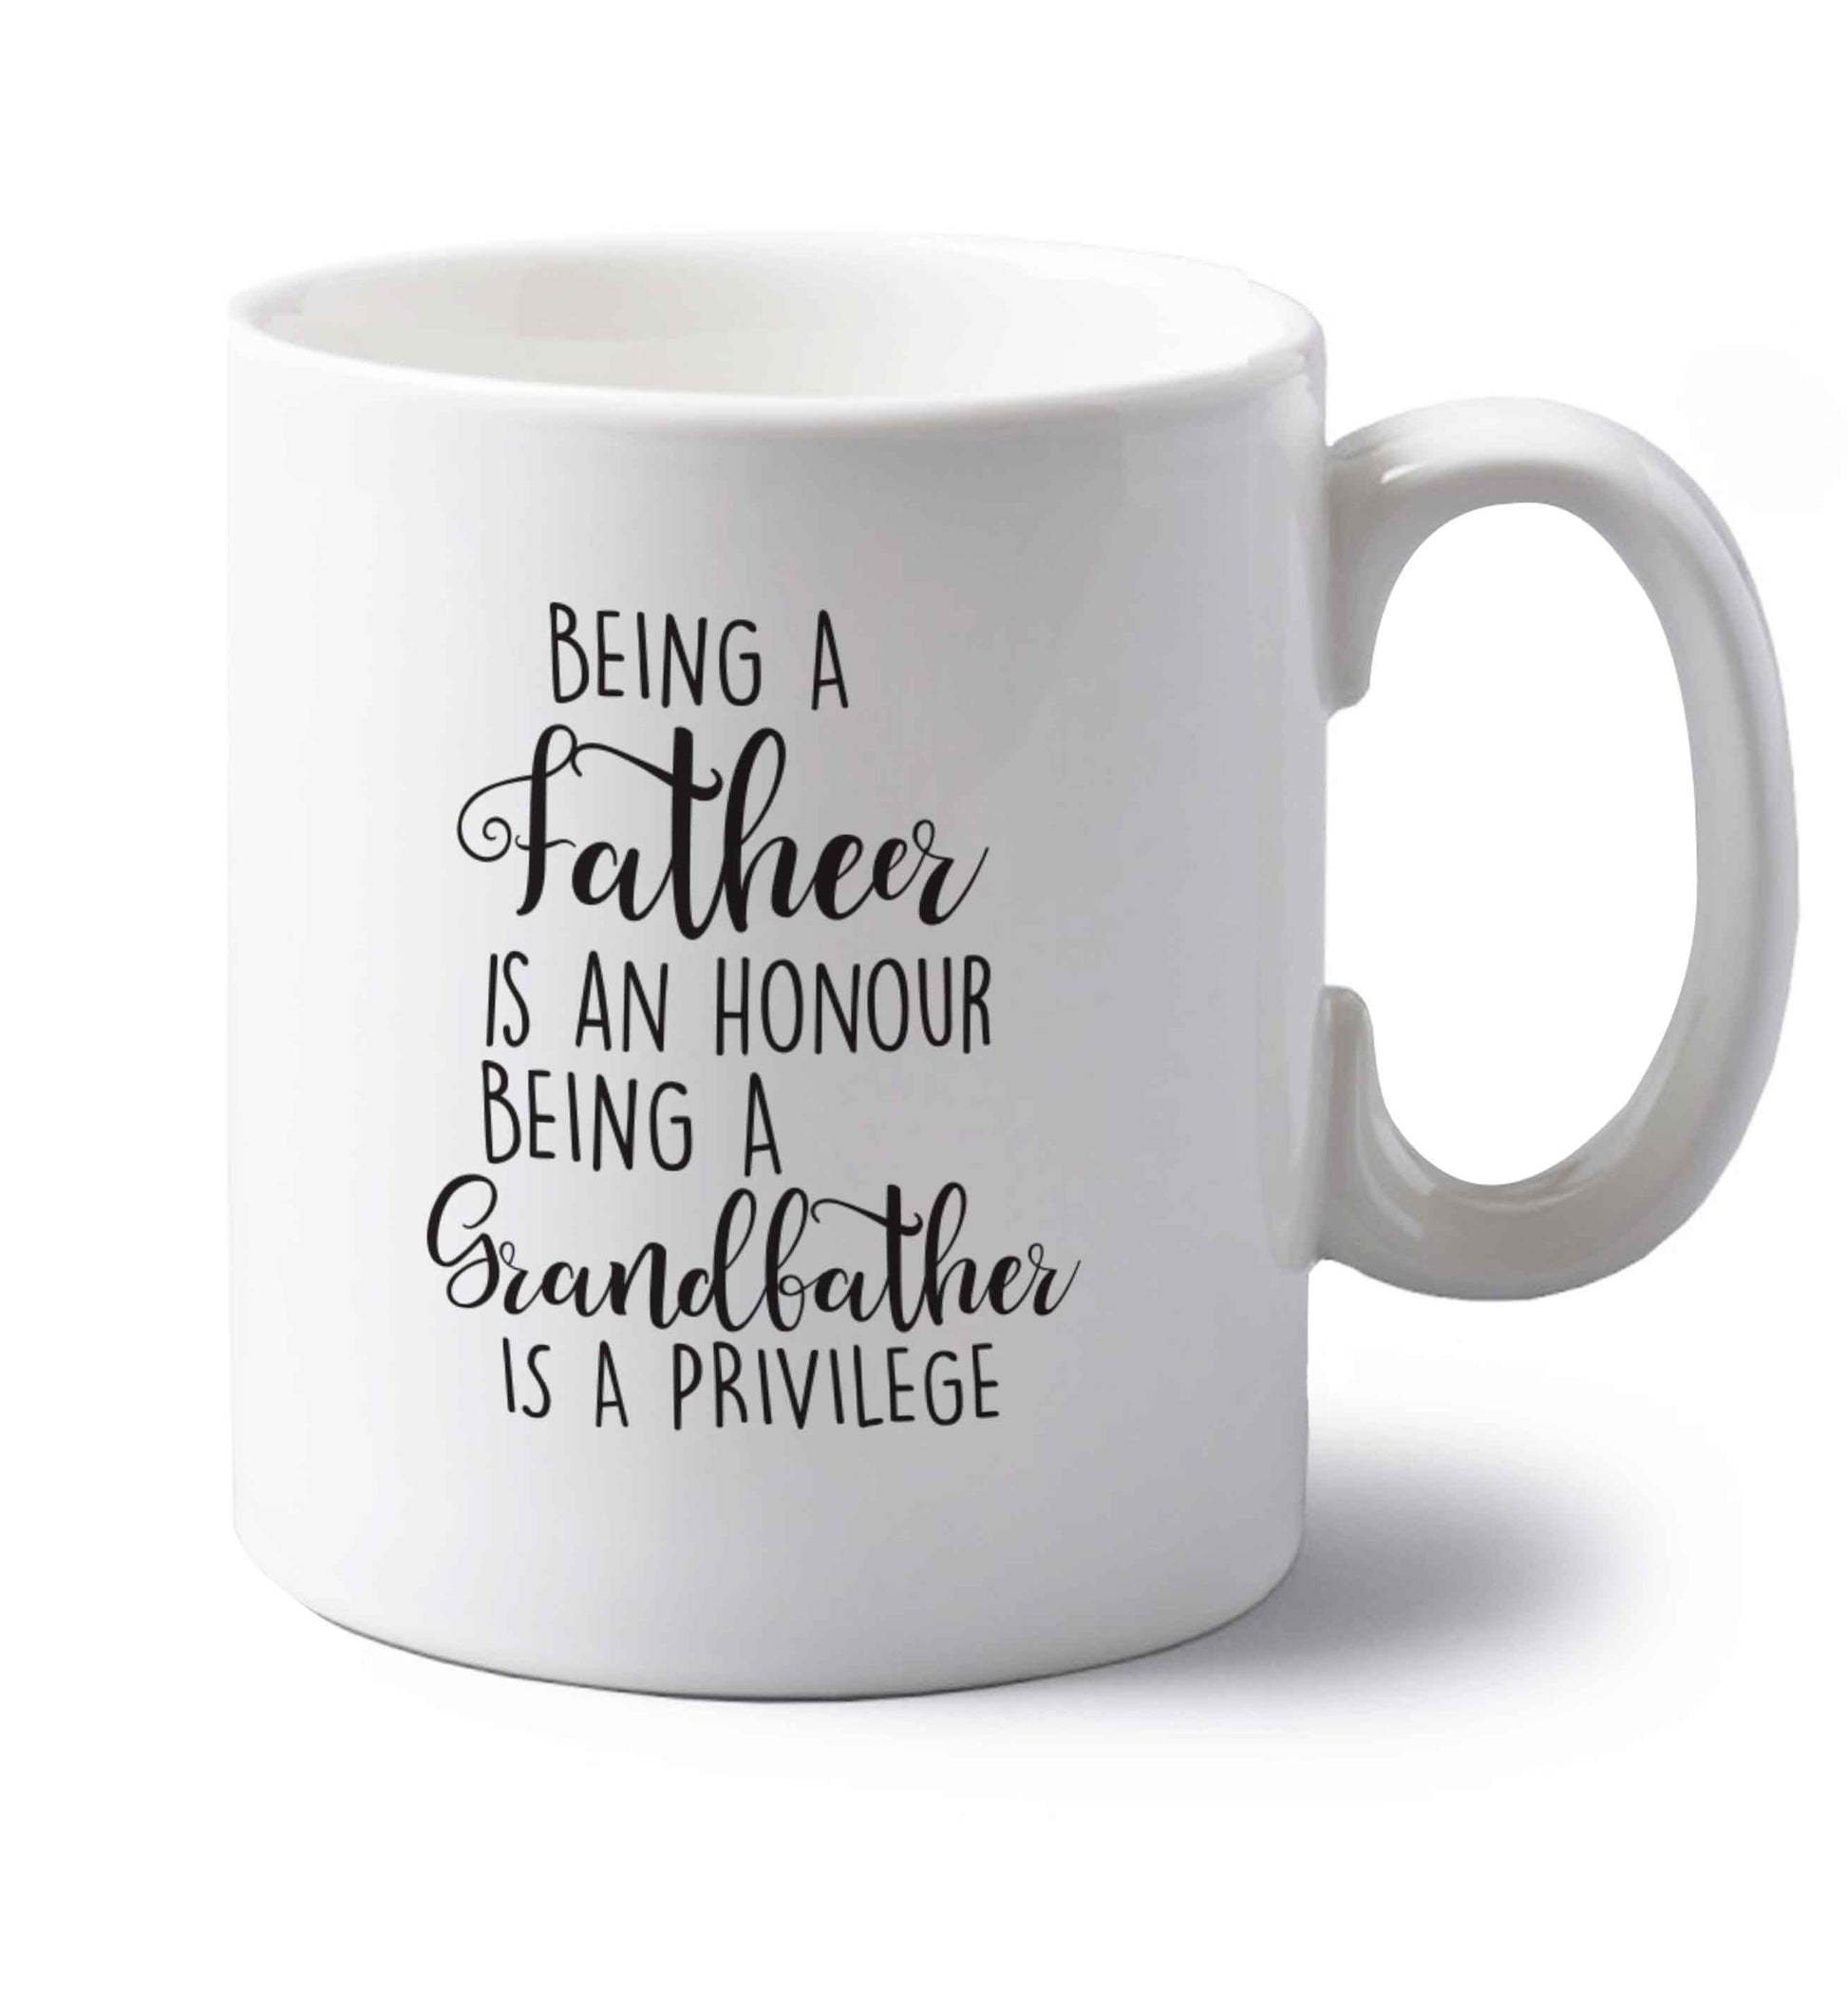 Being a father is an honour being a grandfather is a privilege left handed white ceramic mug 